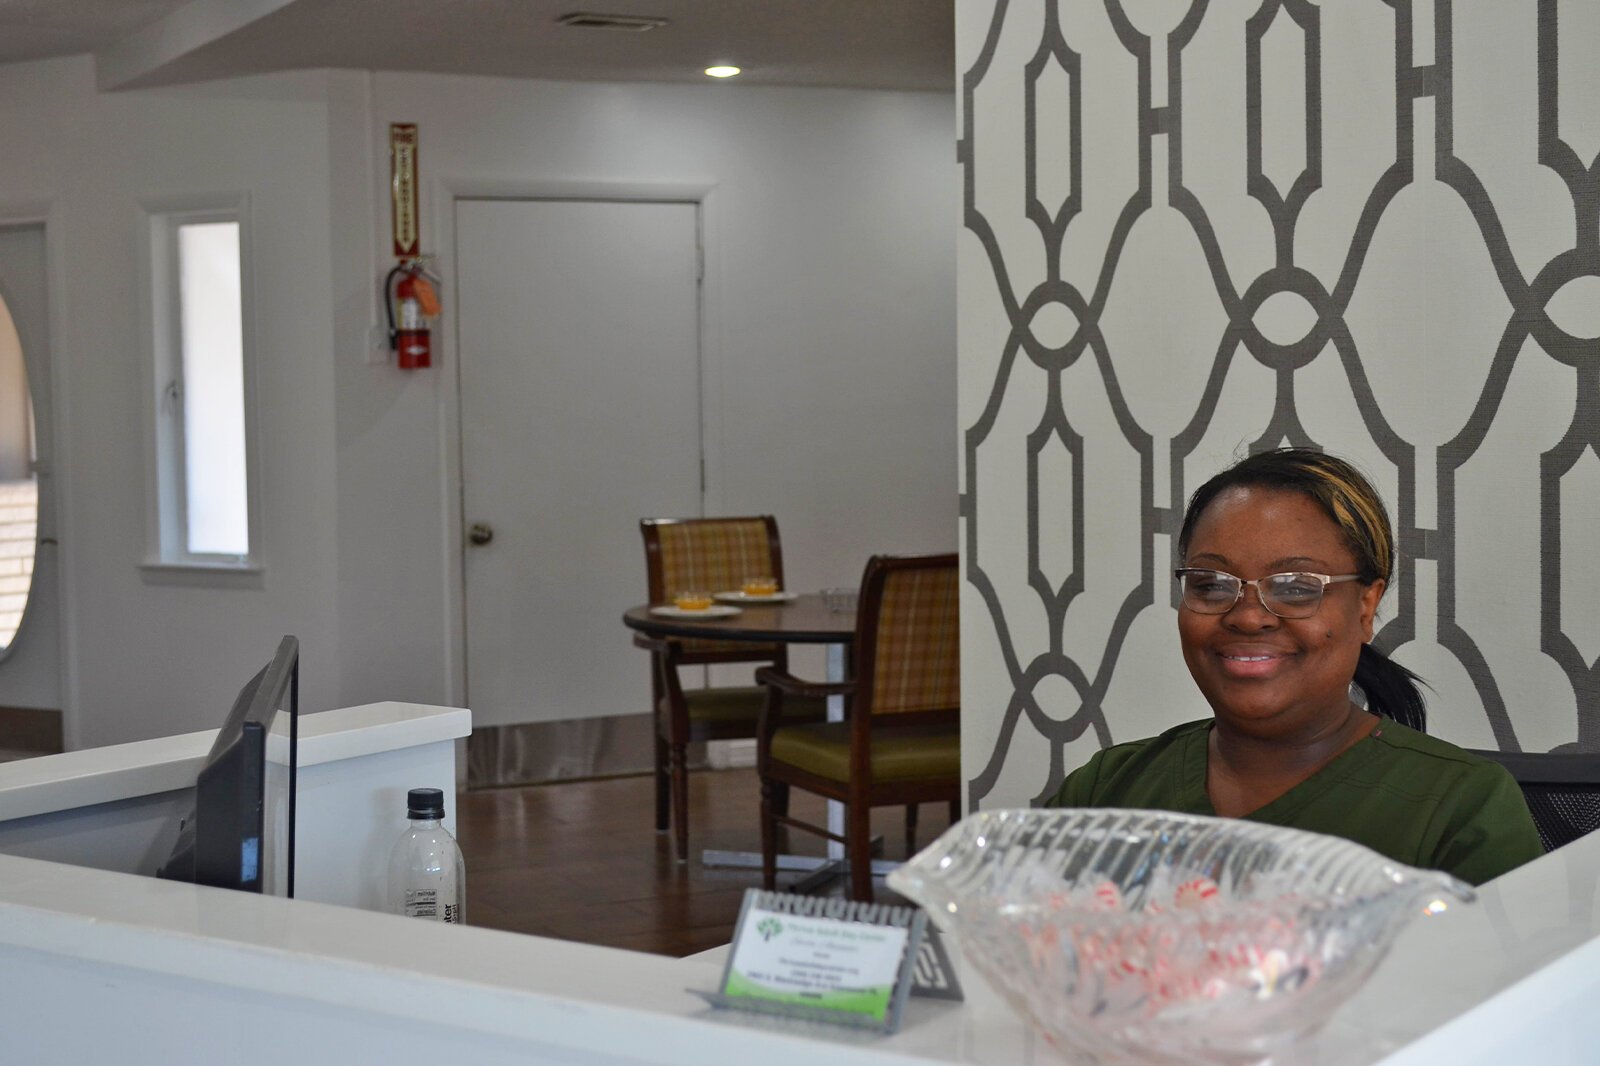 Thrive founder and owner Sarita Alexander sits smiling, ready to welcome new patrons. 